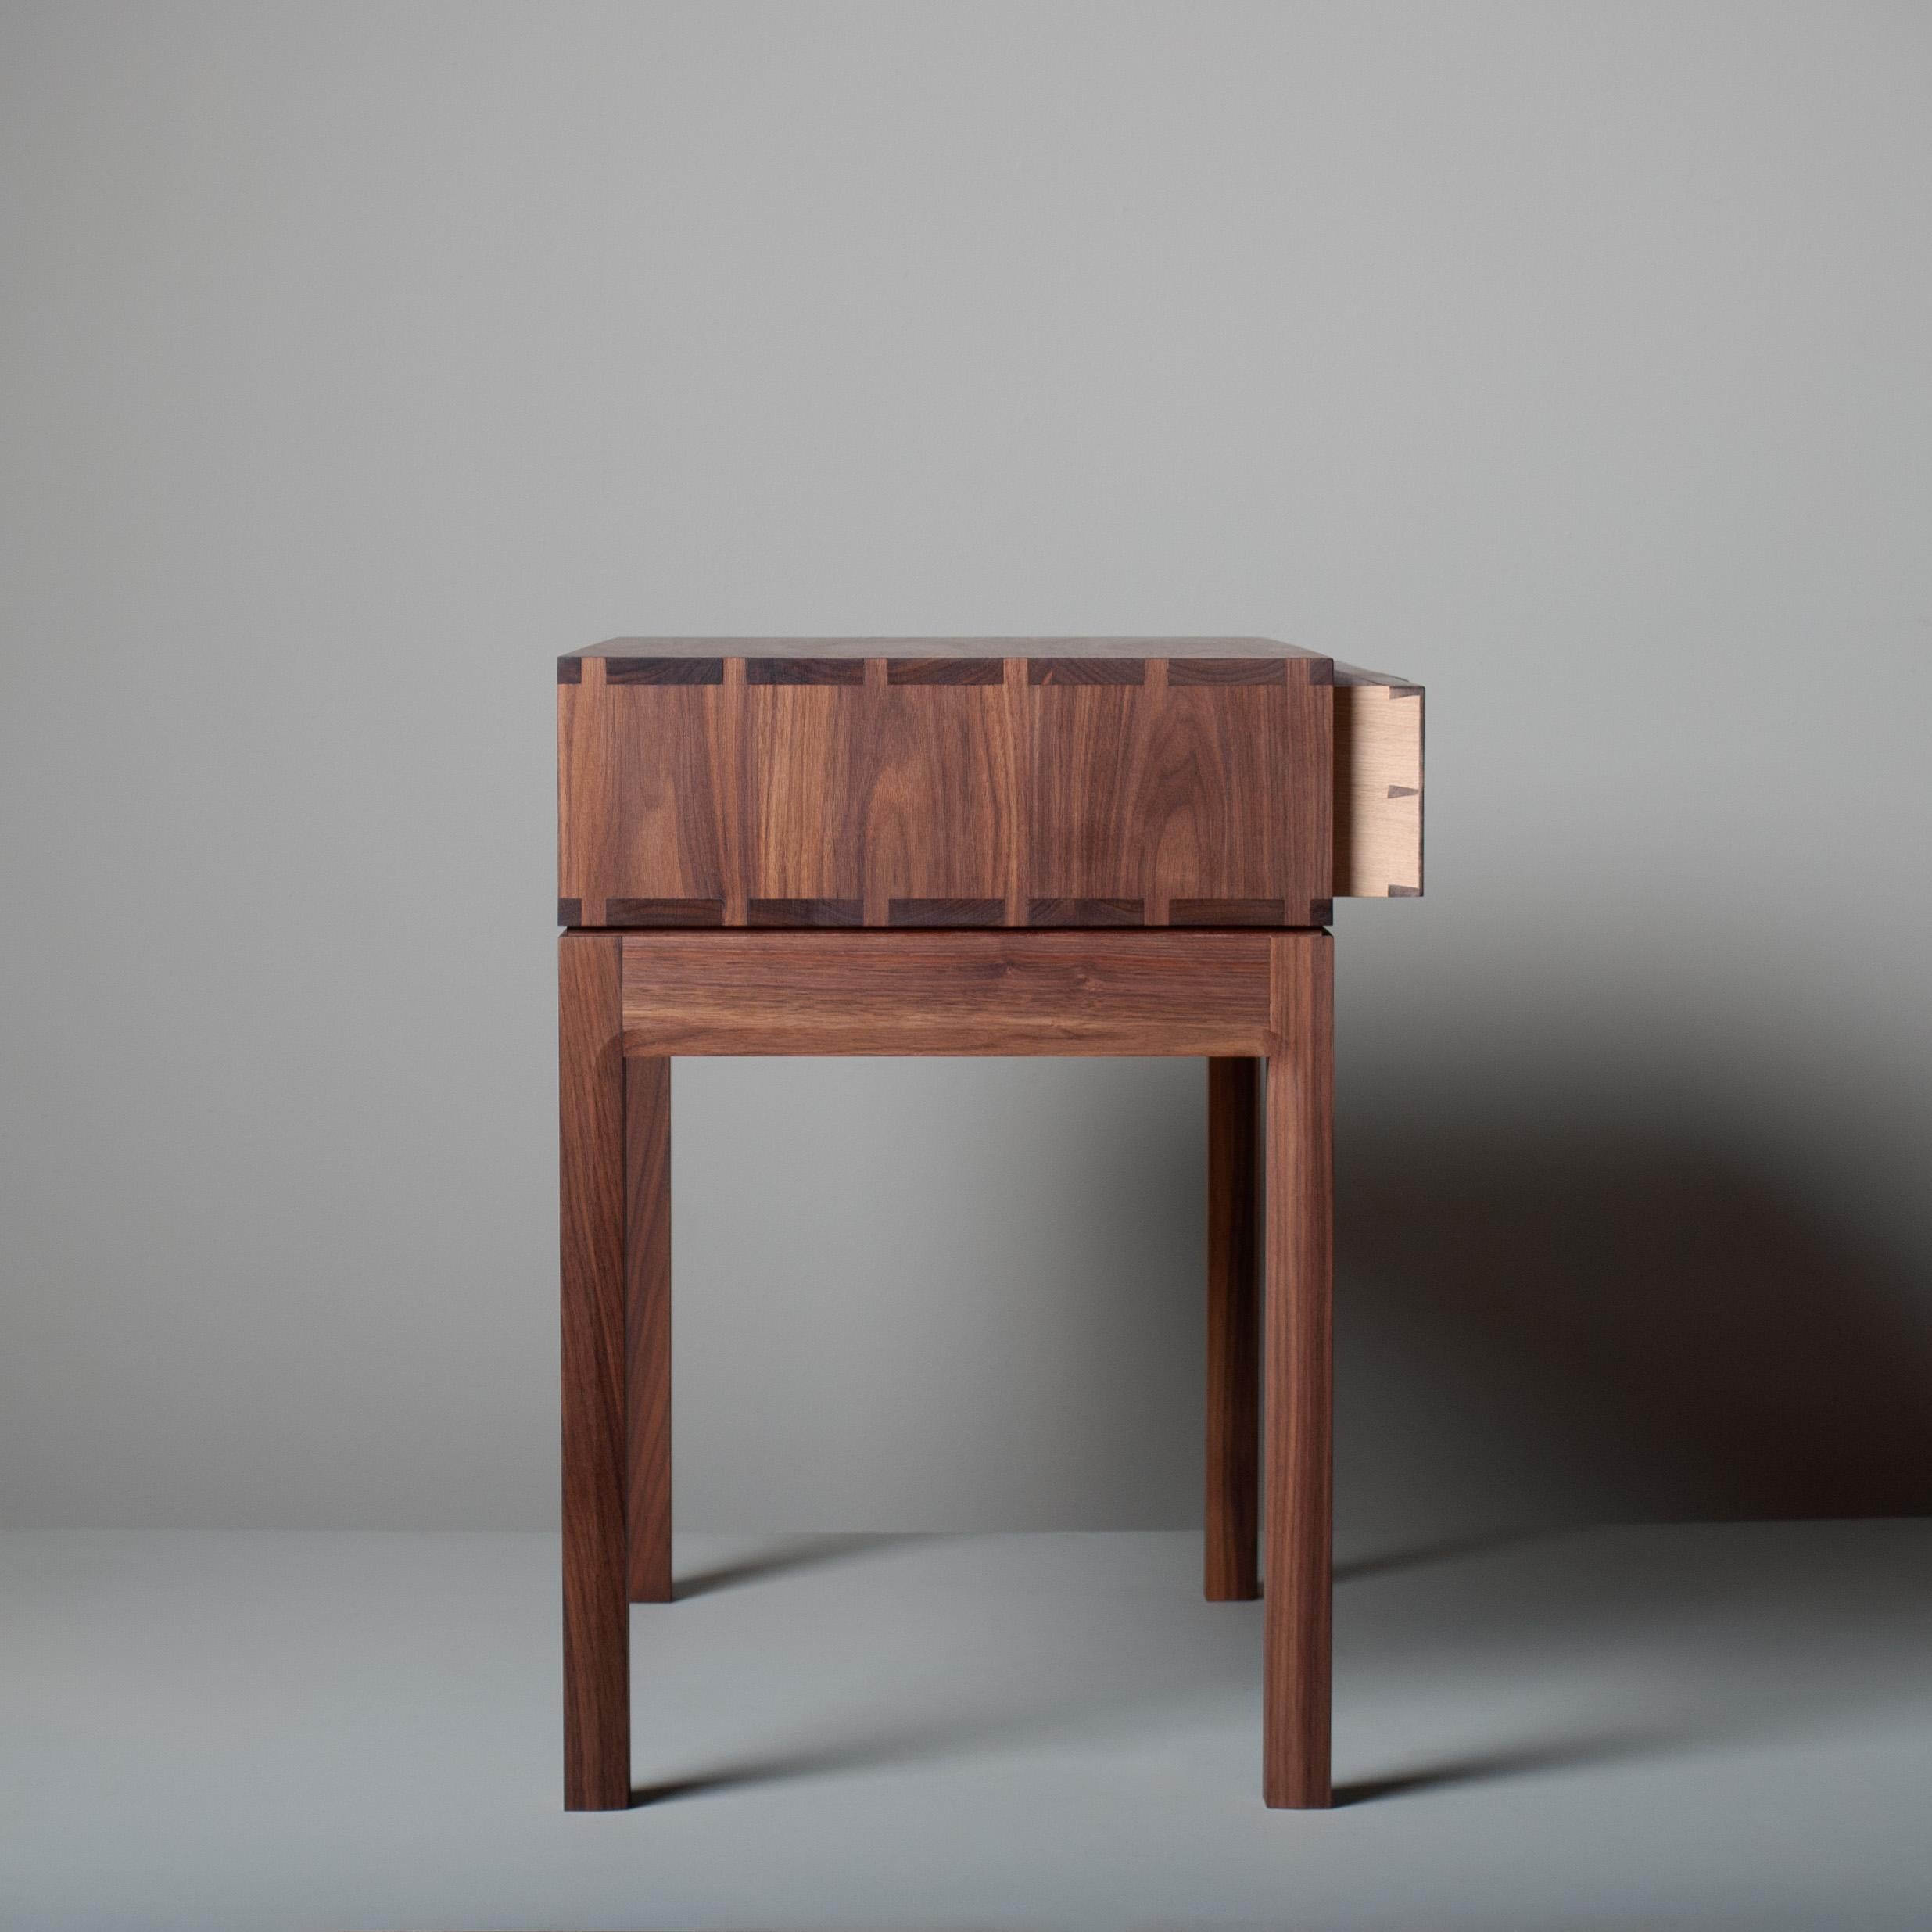 An alternative version, in much larger proportions, of our American black walnut hand-crafted nightstands - end tables in a modernist design. These are constructed from the finest American black walnut with the inner dovetailed jointed traditional